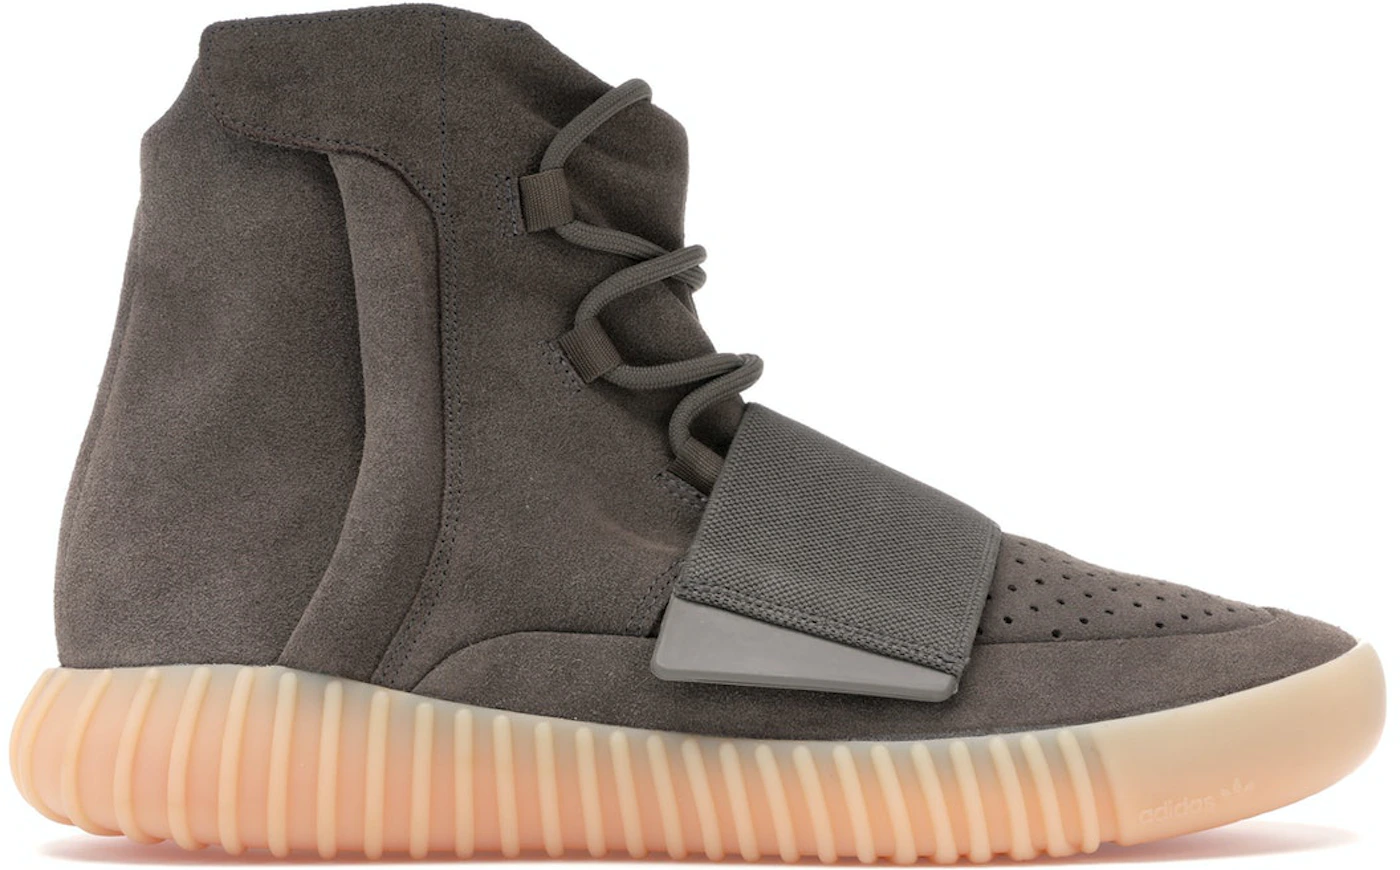 adidas Yeezy Boost 750 Chocolate Men's - BY2456 - US